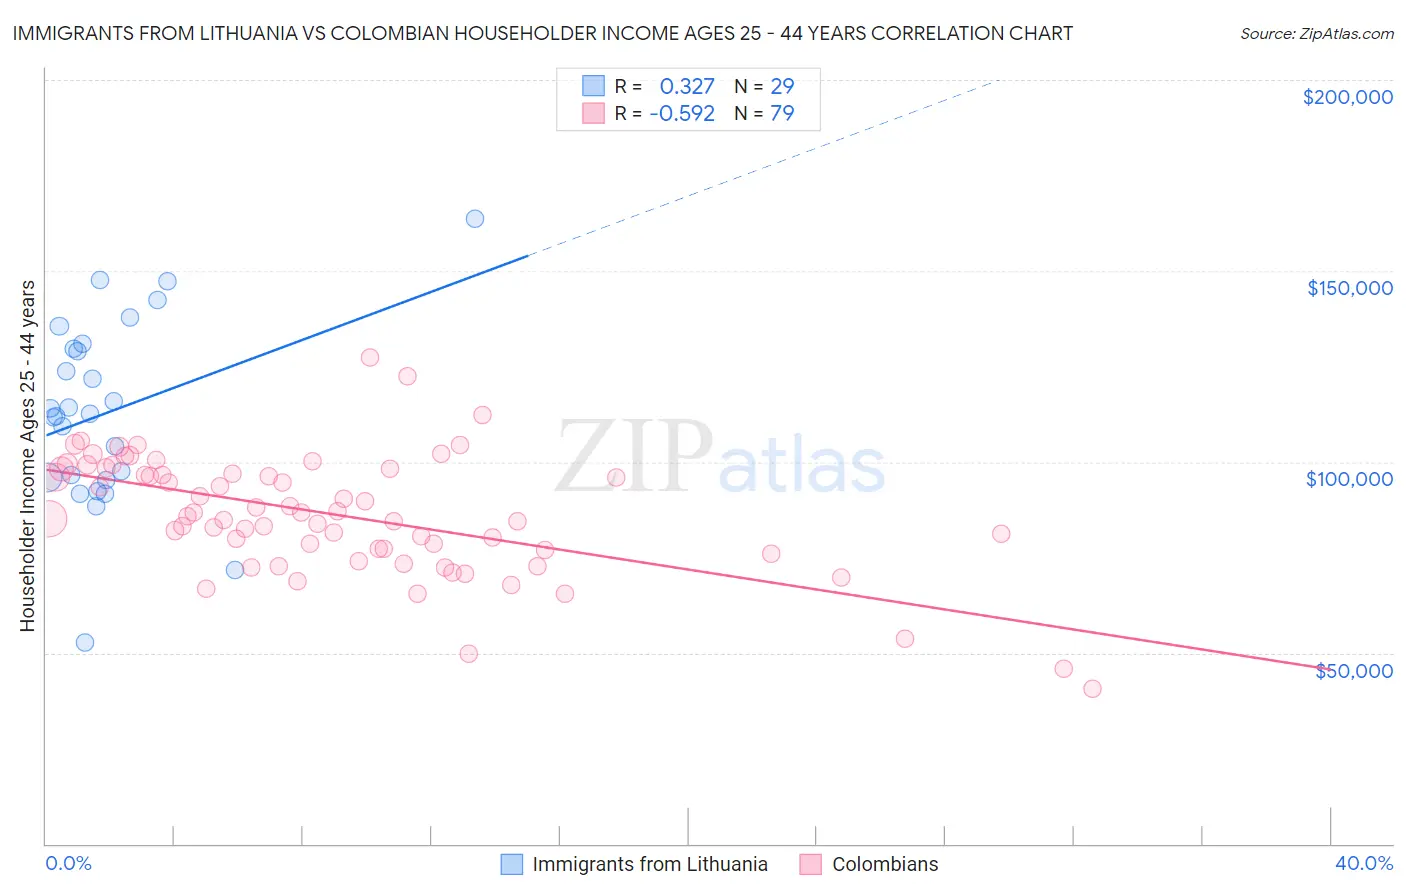 Immigrants from Lithuania vs Colombian Householder Income Ages 25 - 44 years